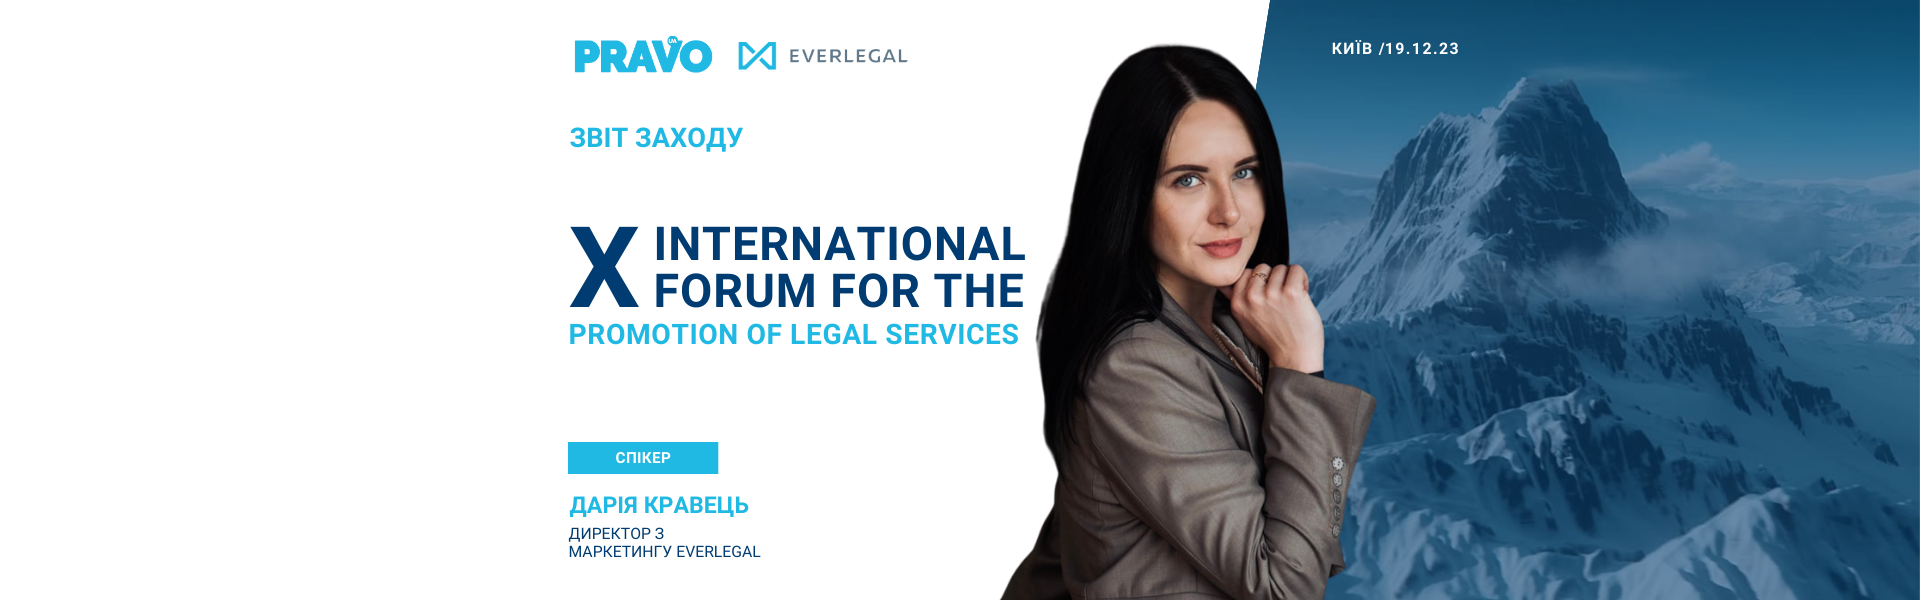 EVERLEGAL's Marketing Director shared her experience of cooperation with international organizations in Ukraine